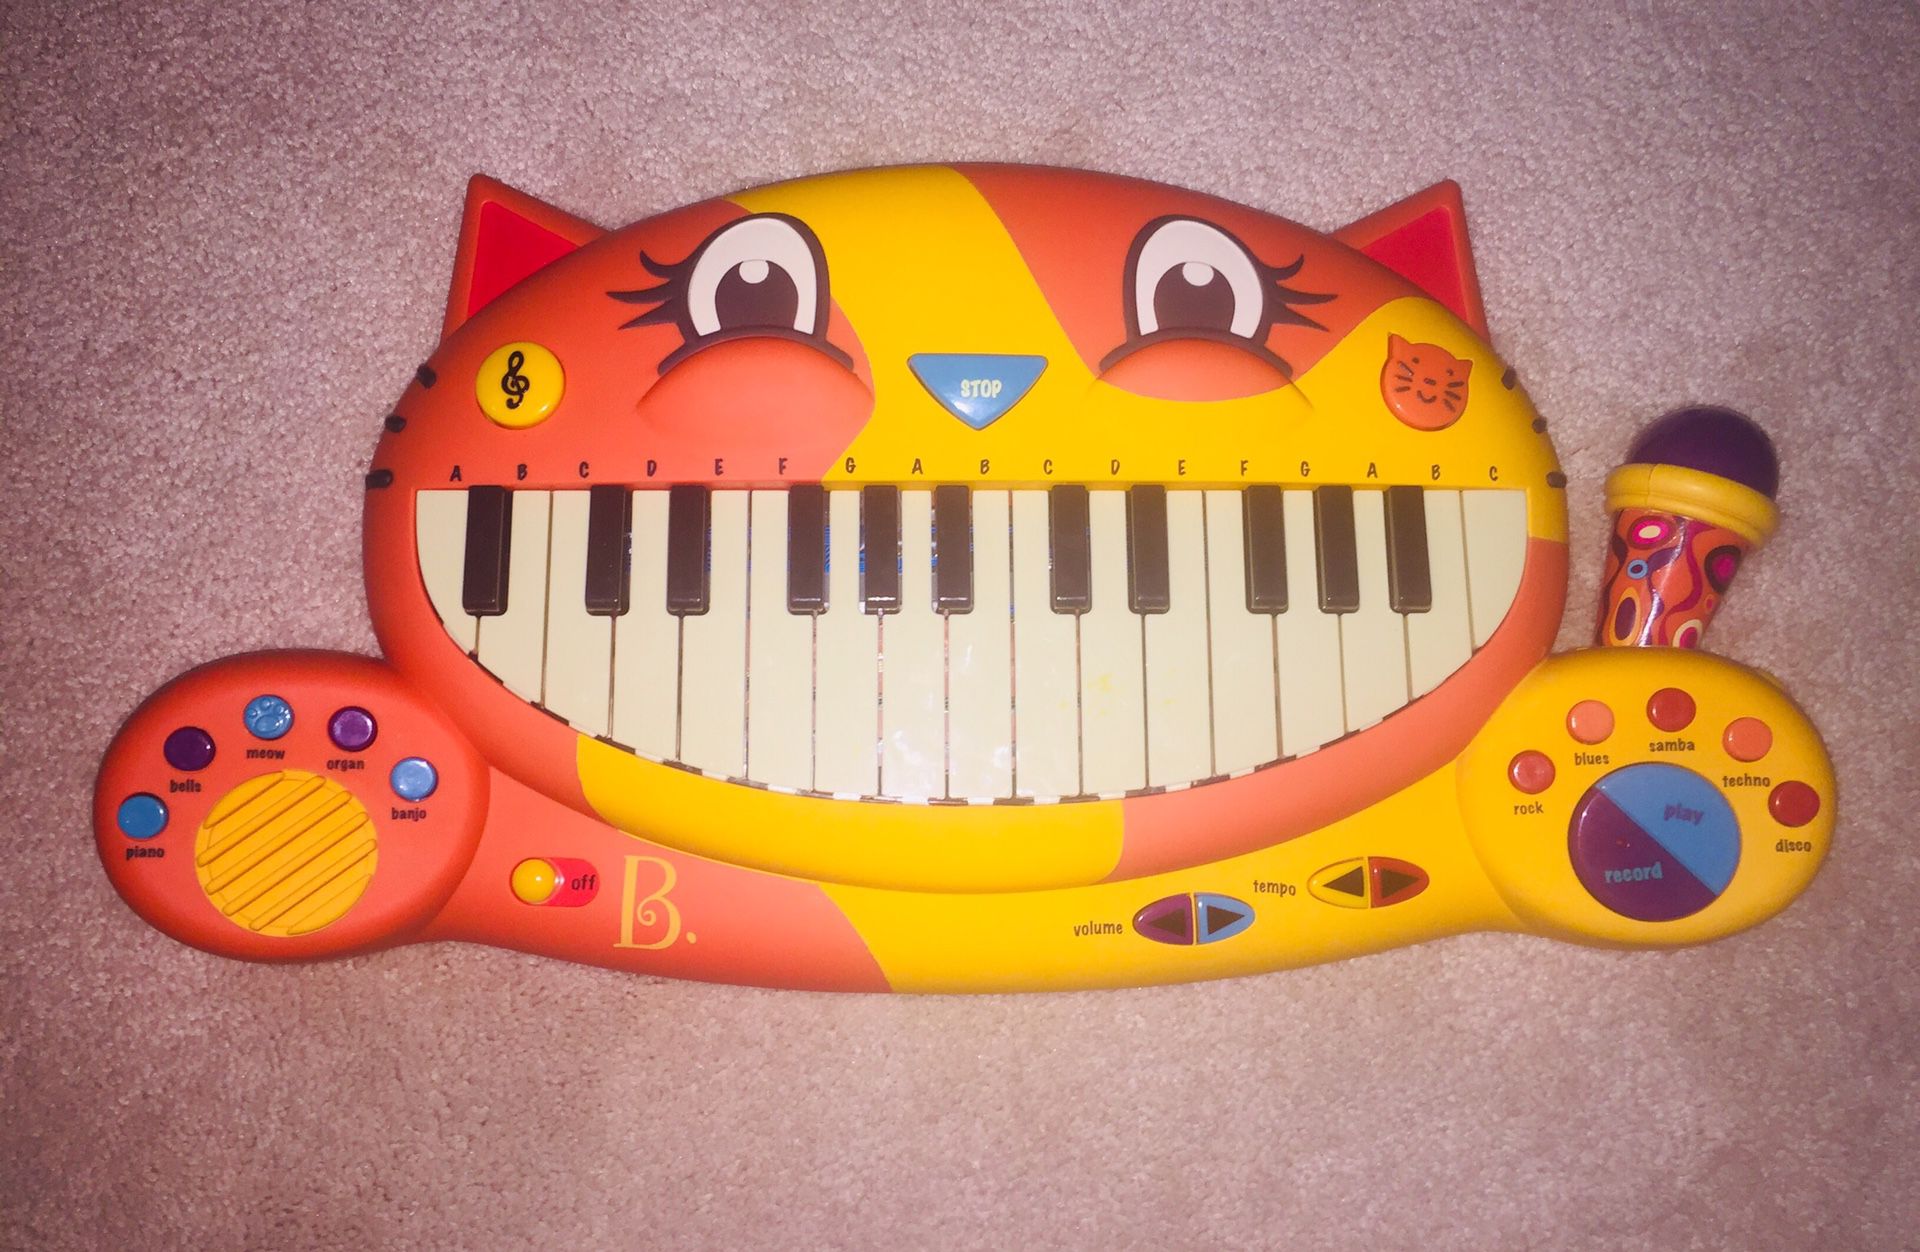 B. toys Cat piano / keyboard with free play, recording feature, working microphone and preprogrammed sounds/songs.